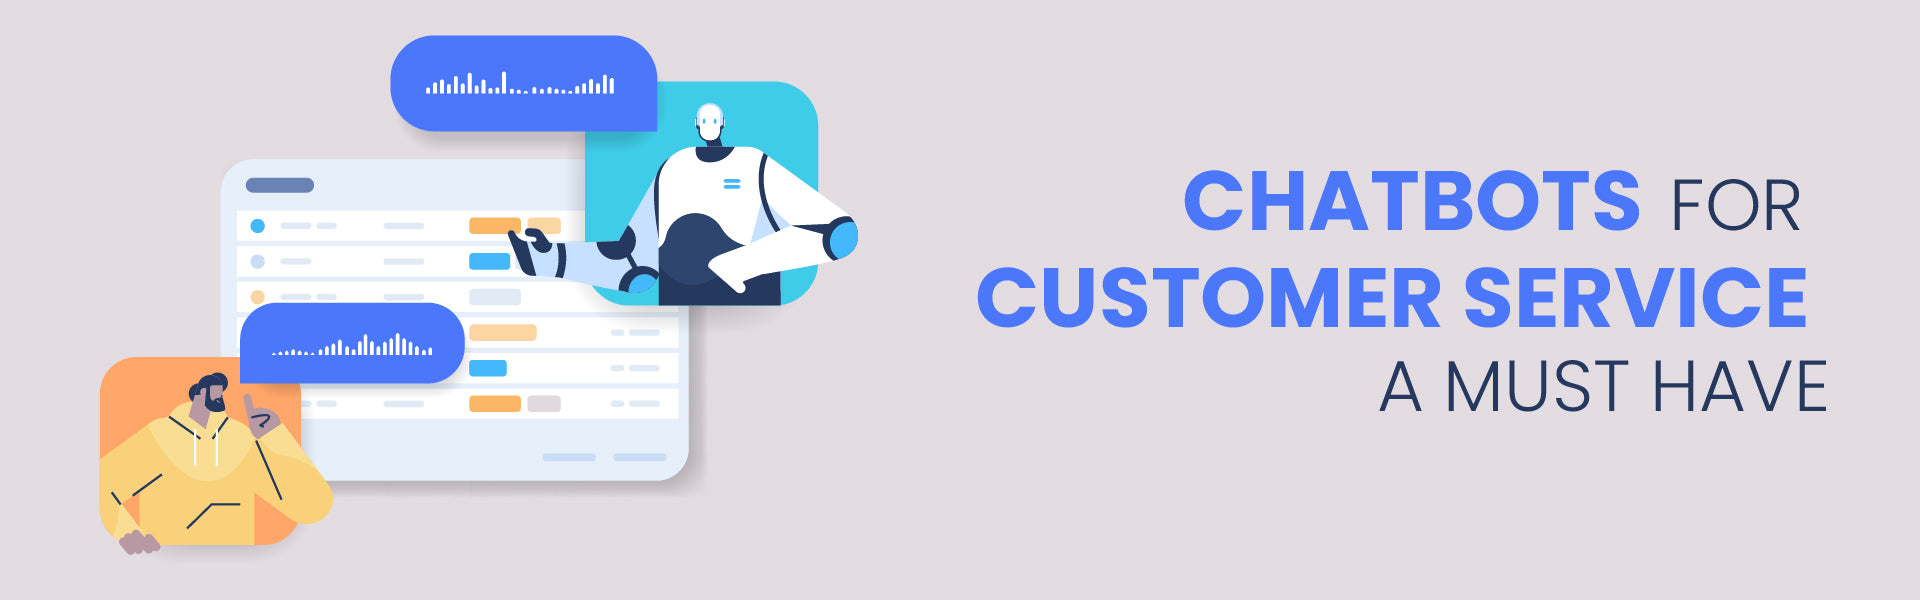 Chatbots for Customer Service - A must have.